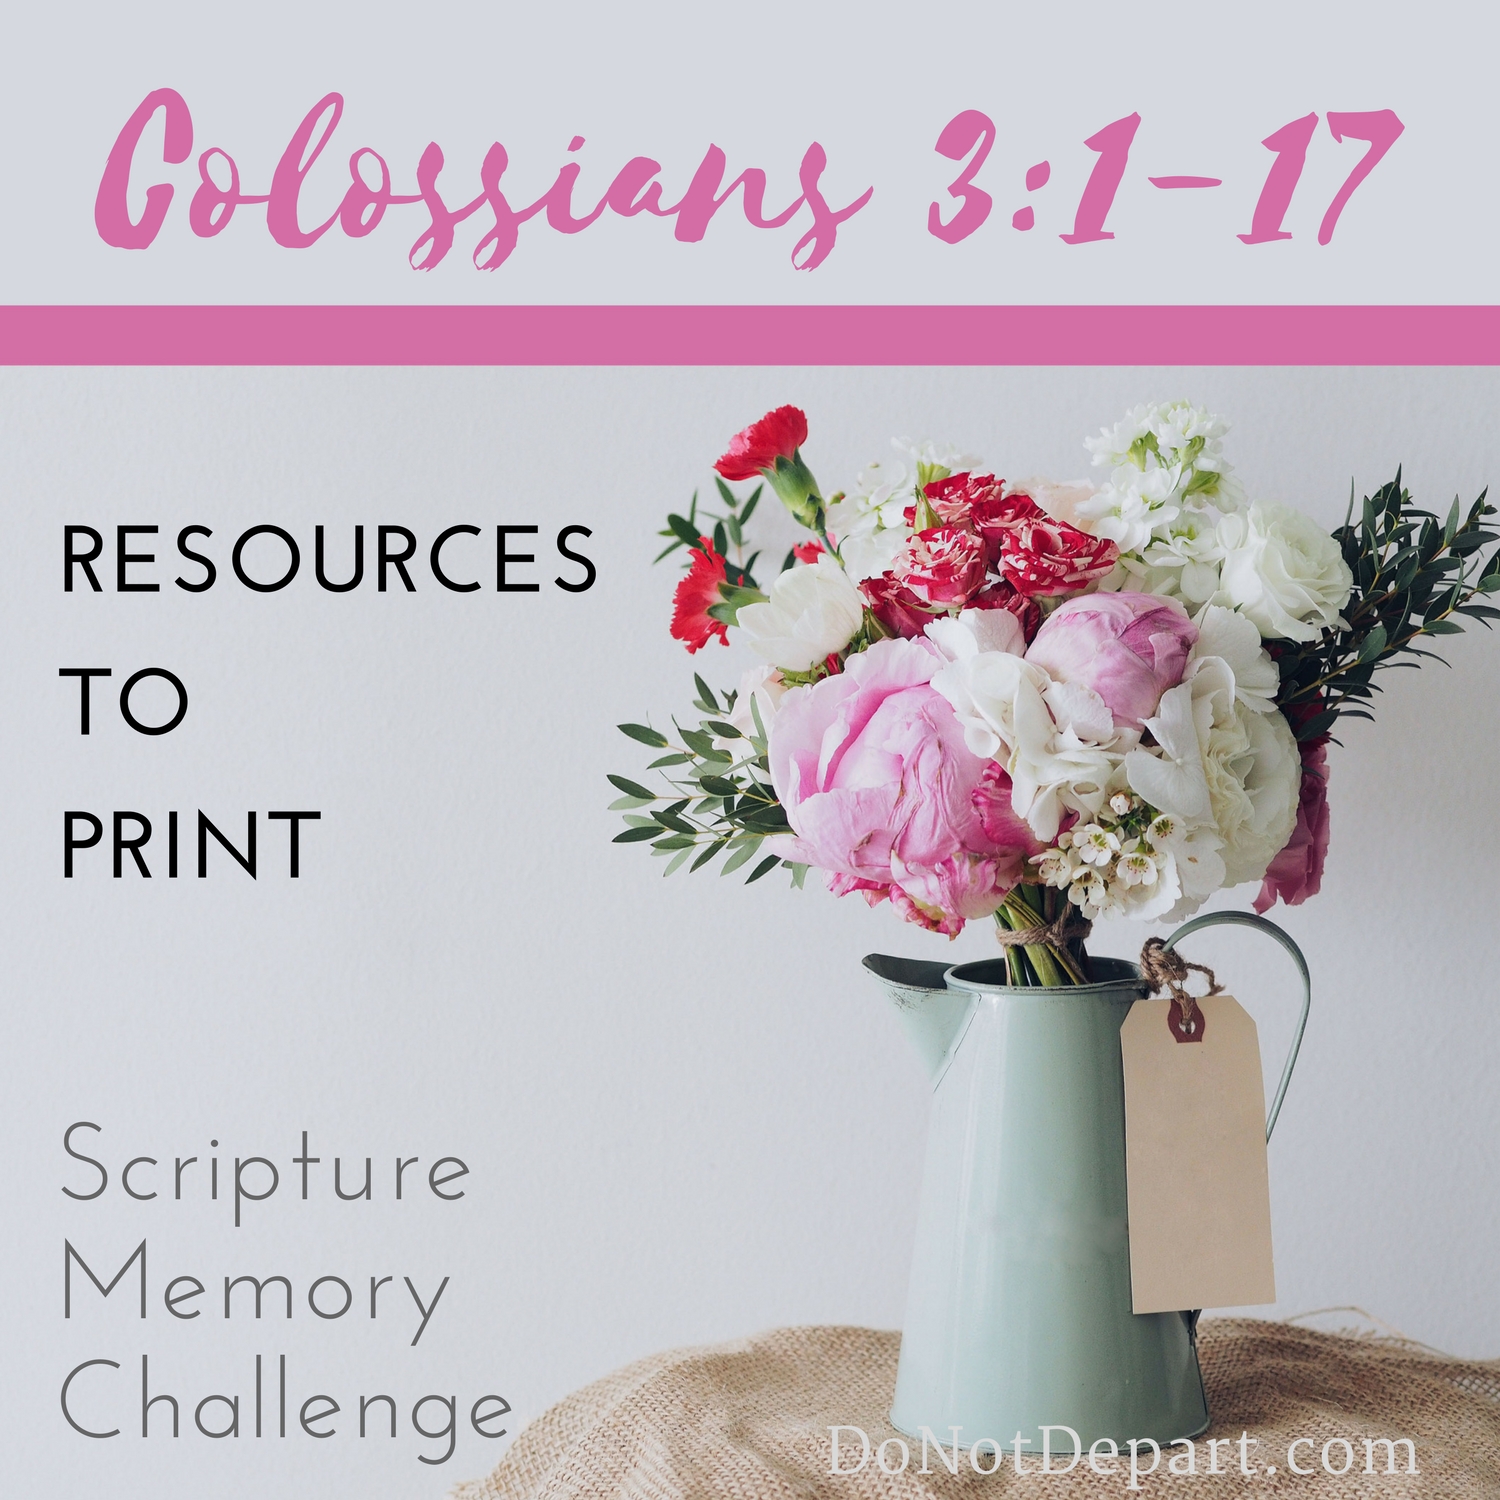 Resources-Colossians-3